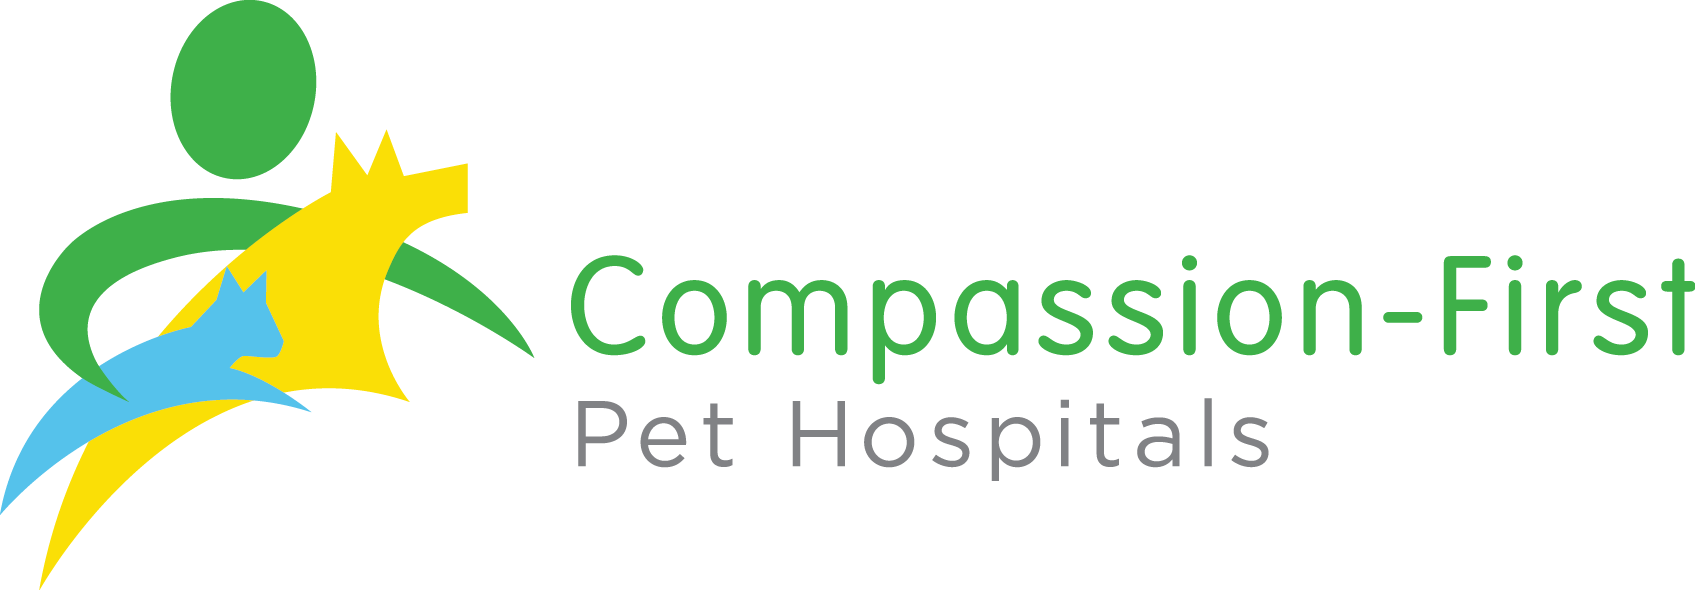 Compassion-First Pet Hospitals Welcomes Dallas Veterinary Surgical Center and Charleston Veterinary Referral Center to the Team